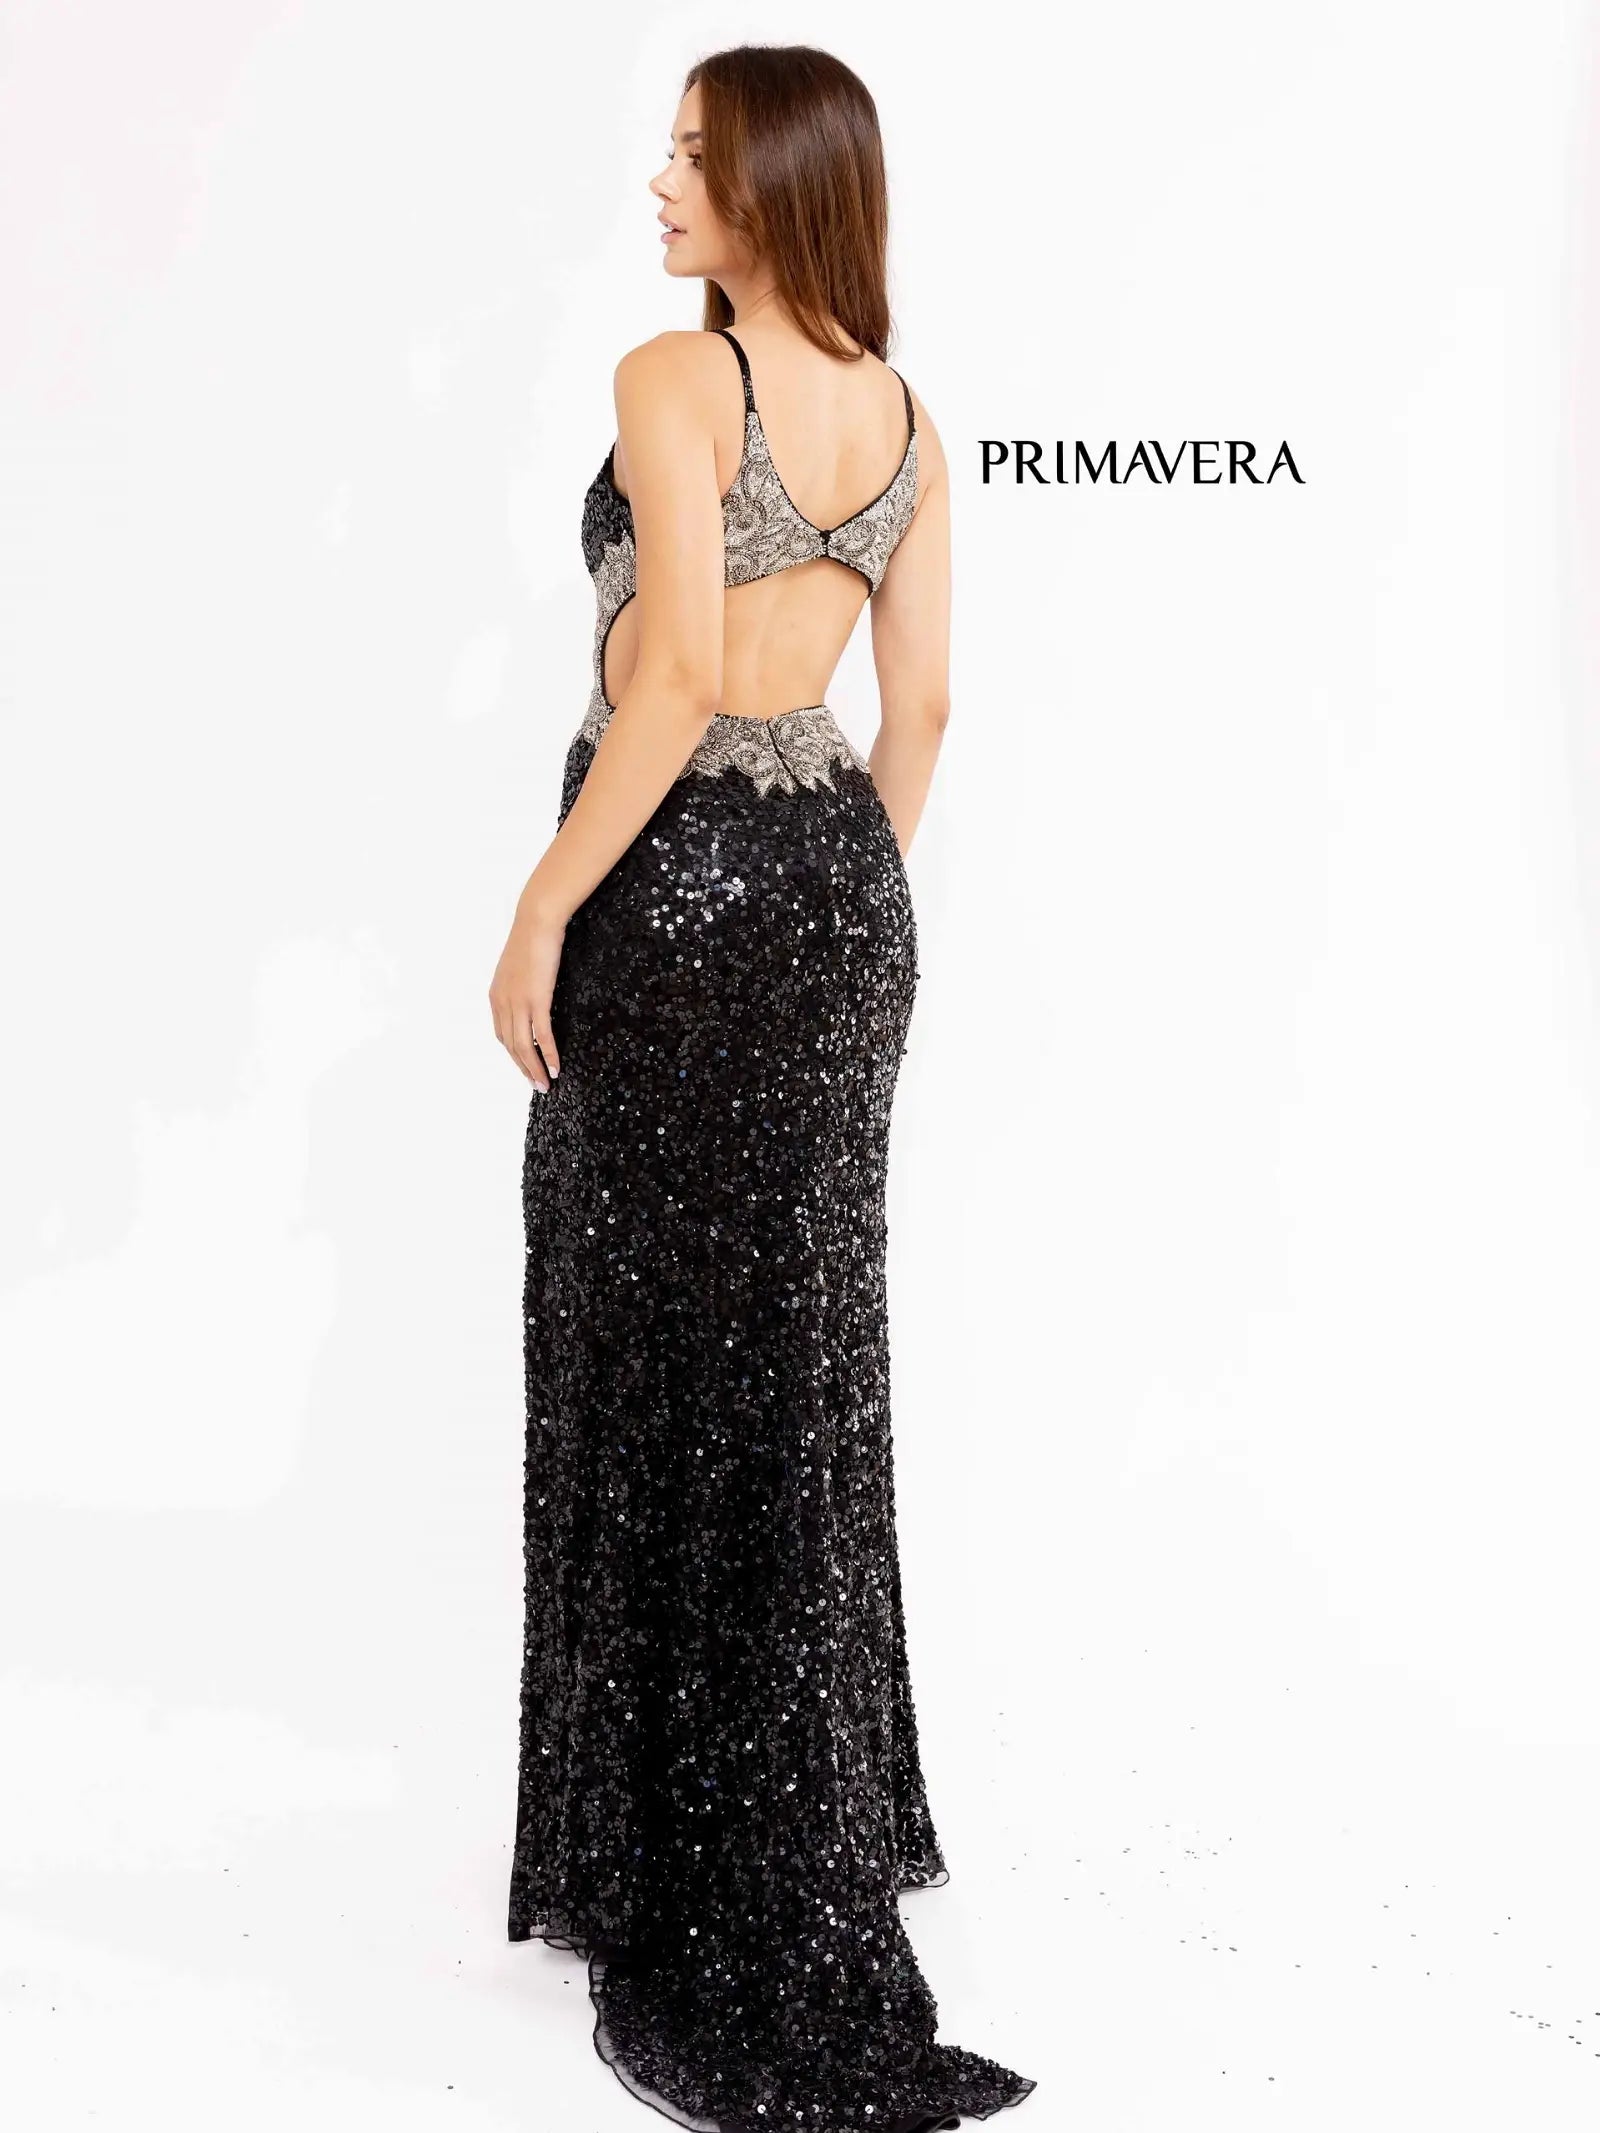 Primavera Couture 3955 Prom Dress Long Beaded Gown. This gown has a beautiful design on the side. 